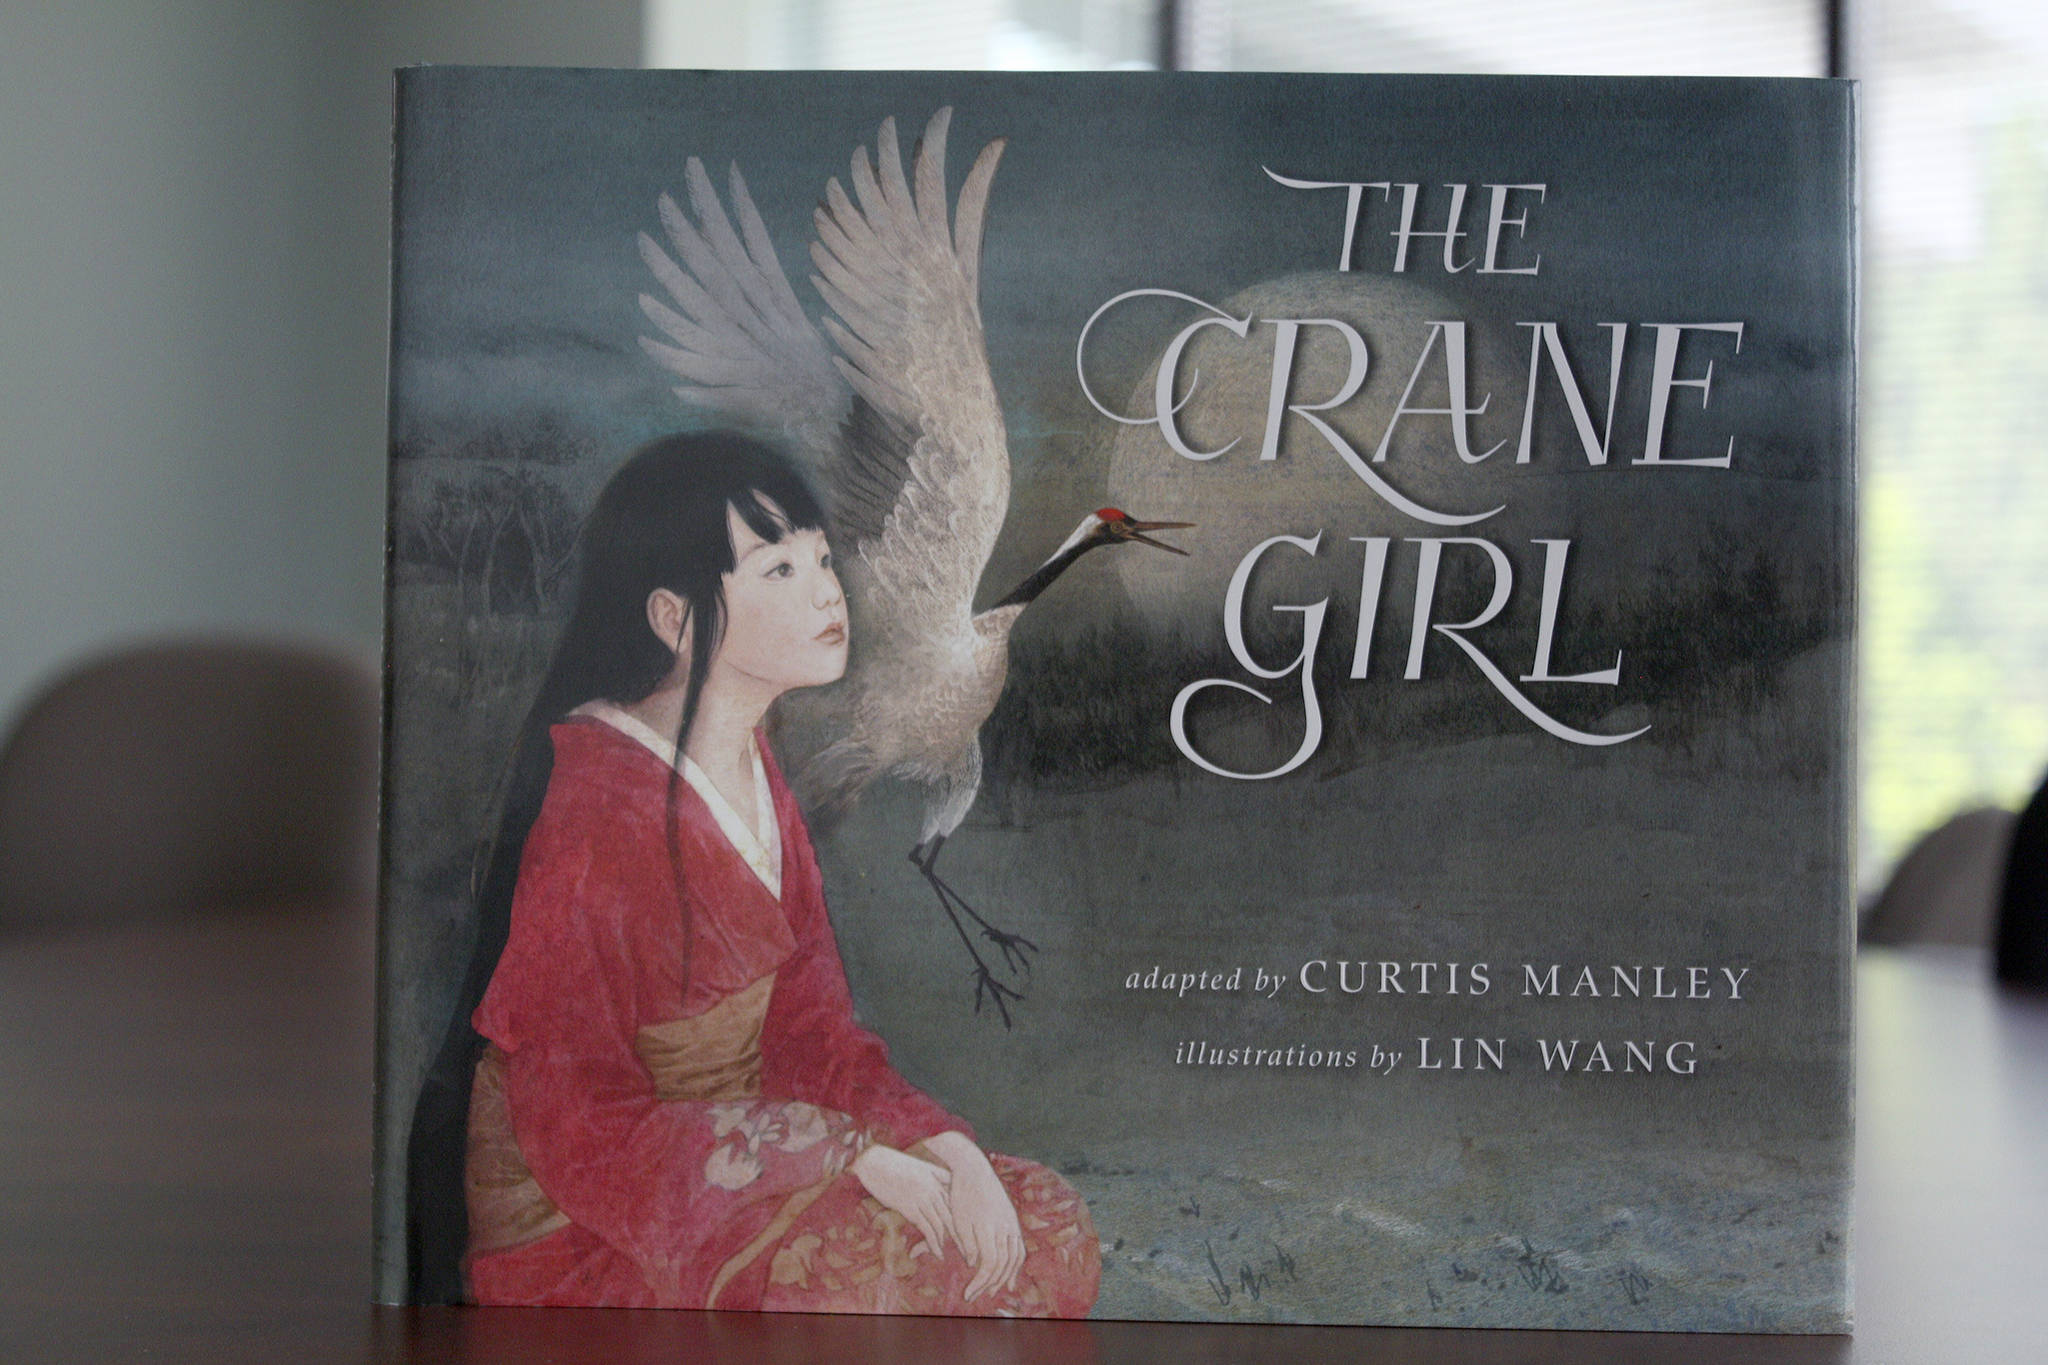 Bellevue author Curtis Manley’s “The Crane Girl” debuts